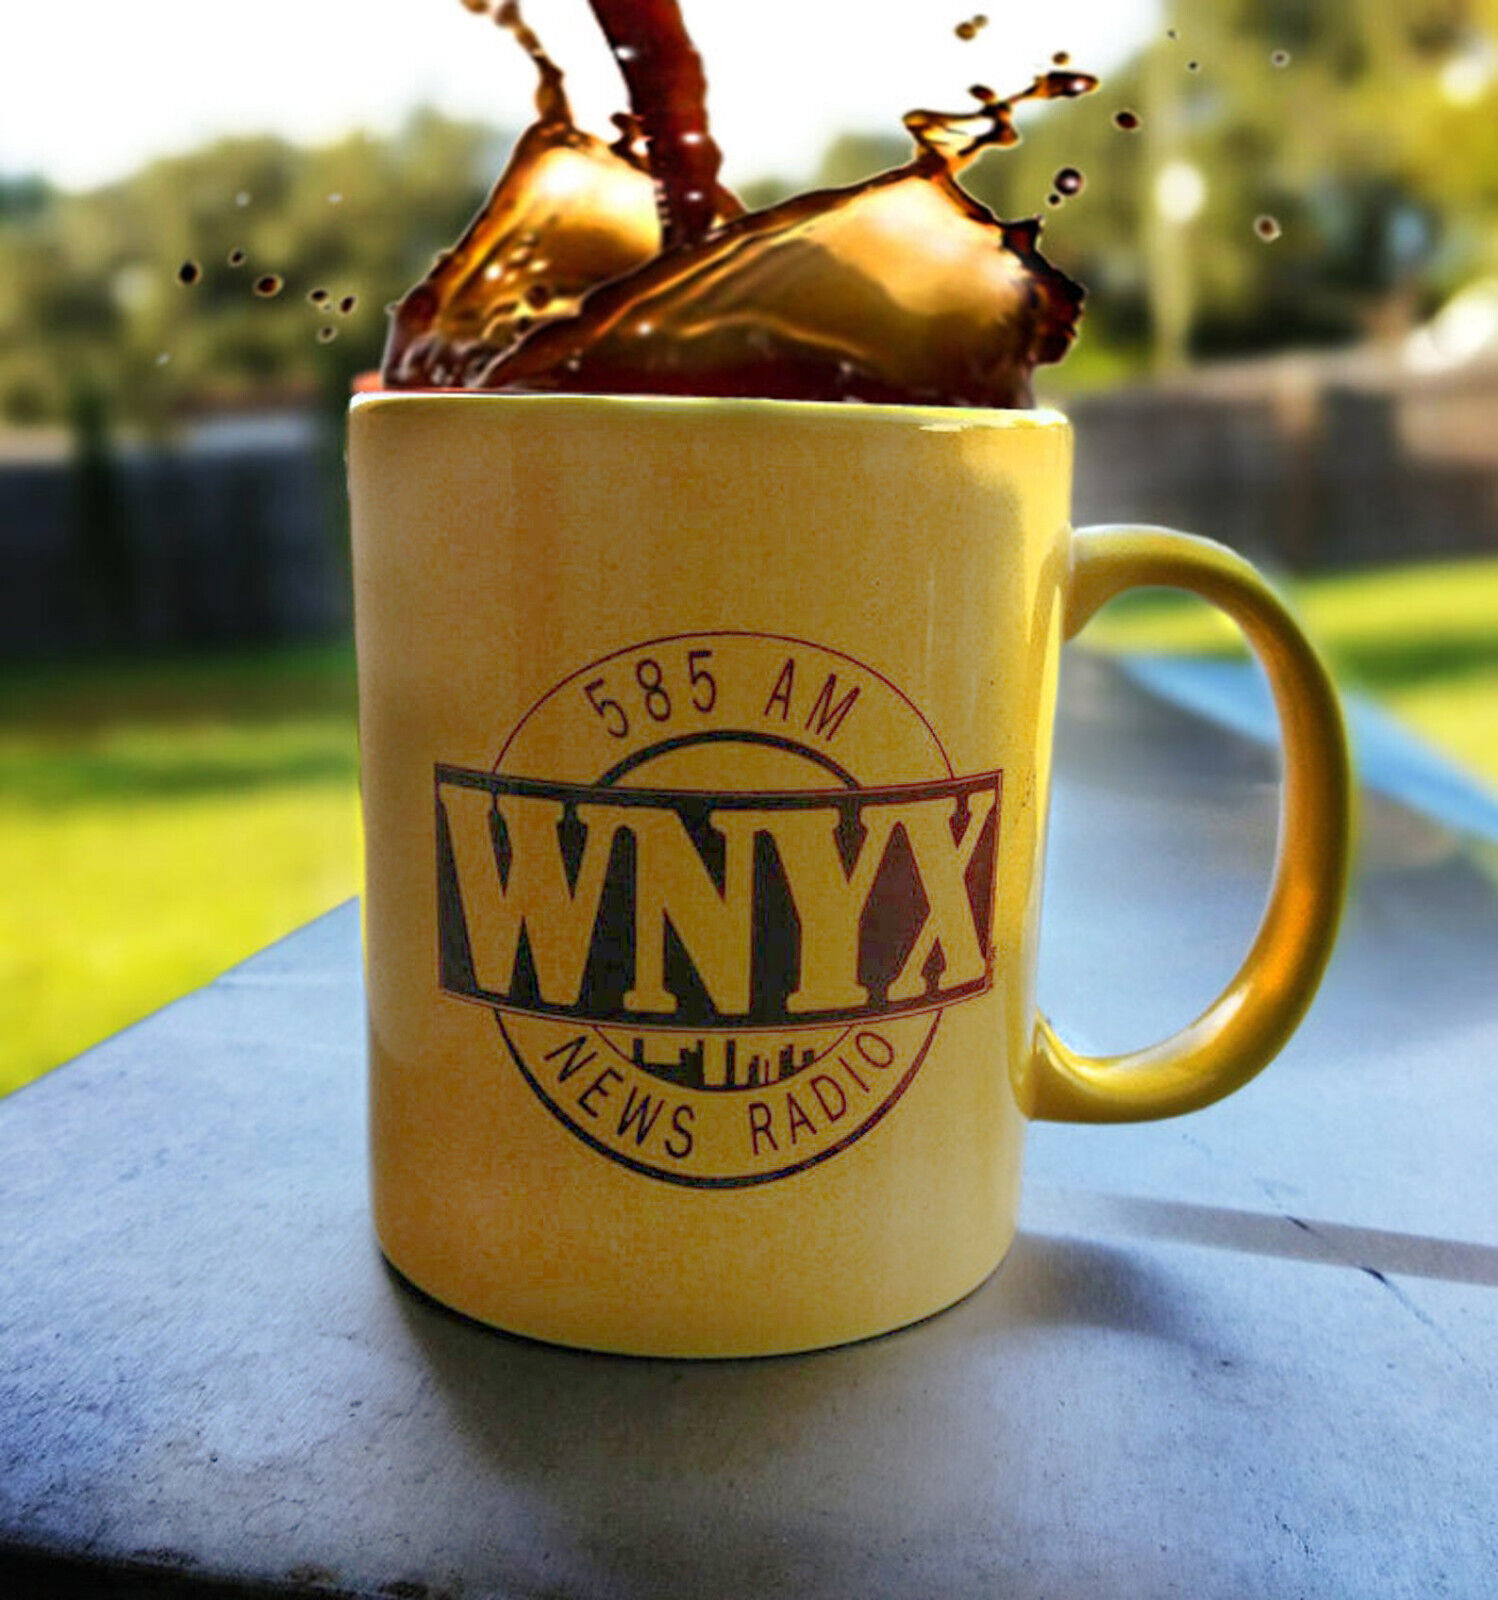 WNYX News Radio 585 AM - The Real Deal This excellent reproduction of the y